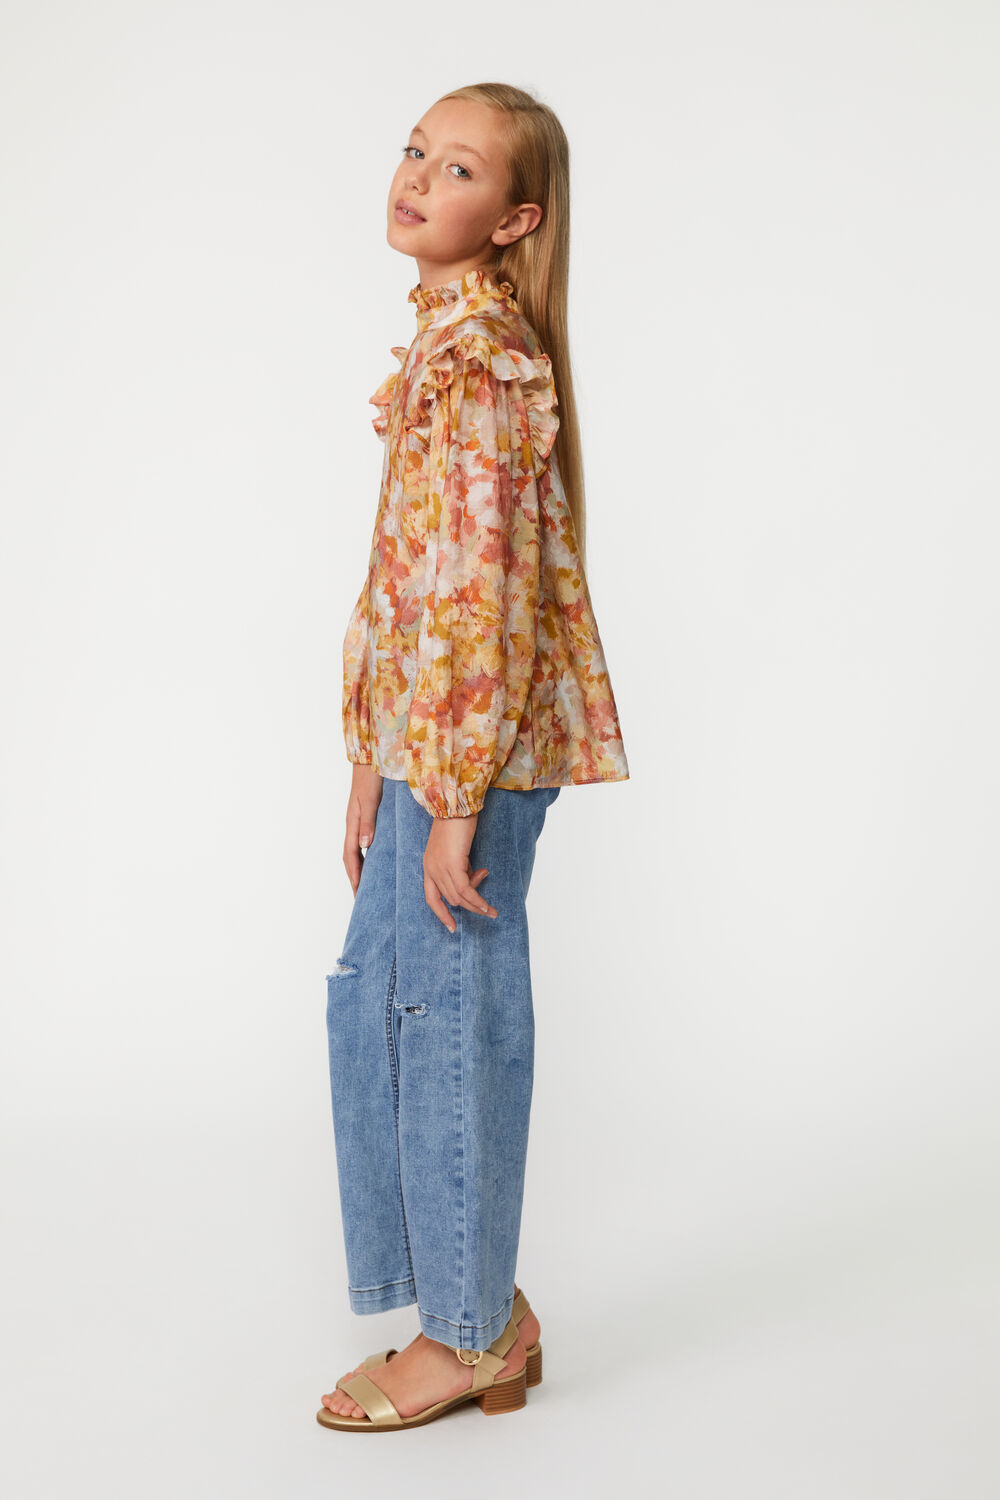 Girls VENICE ABSTRACT SHIRT in colour SKYWAY